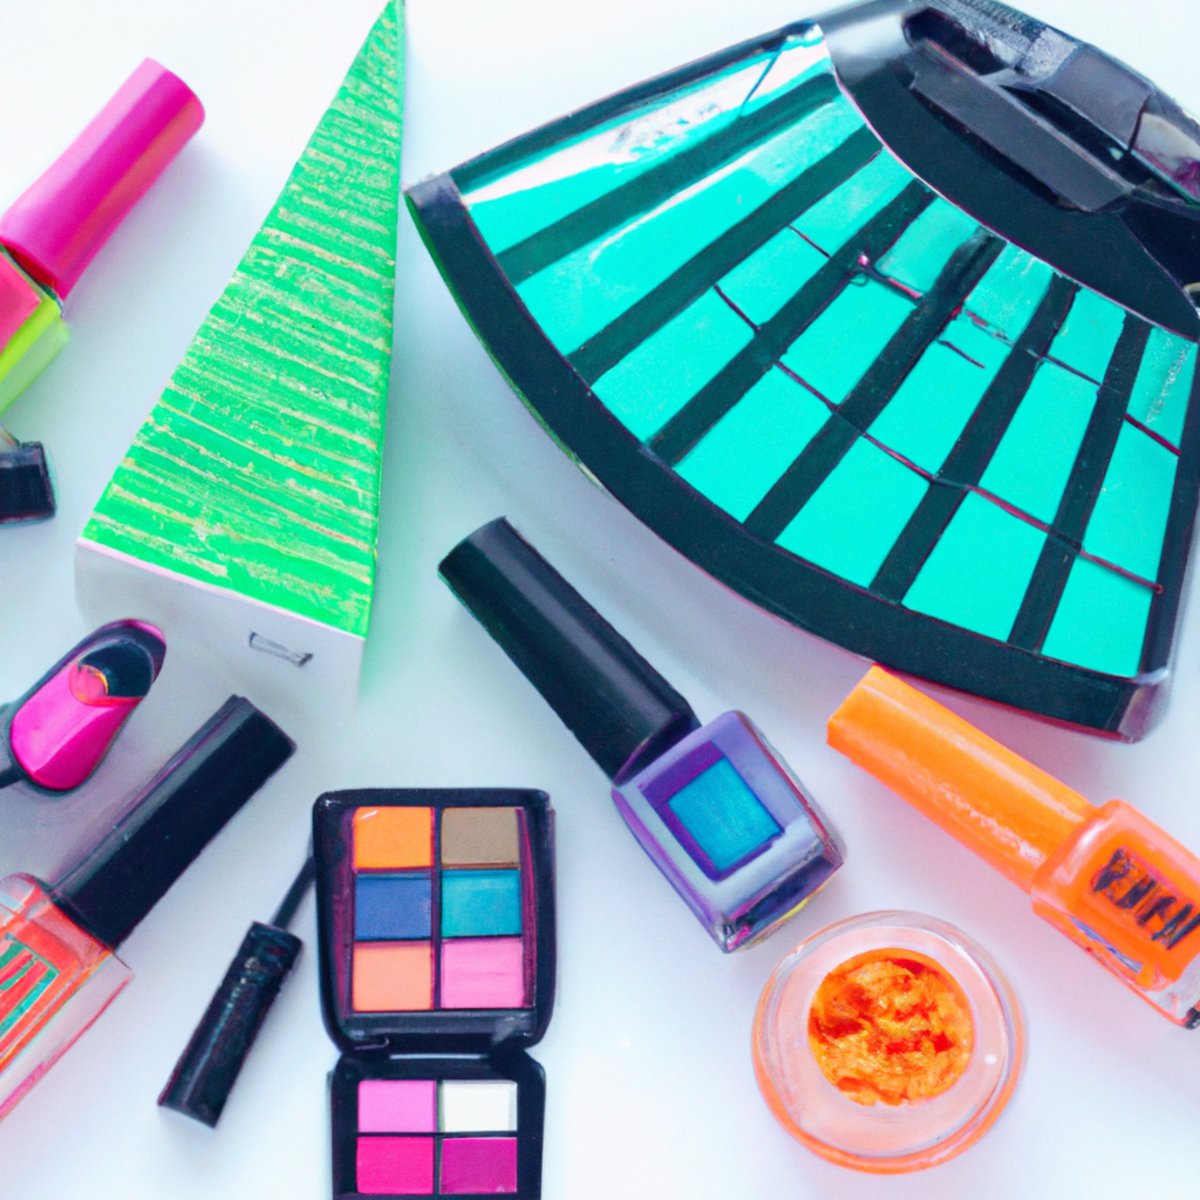 Vibrant neon makeup products arranged on a sleek vanity table, creating a visually striking and captivating pattern.